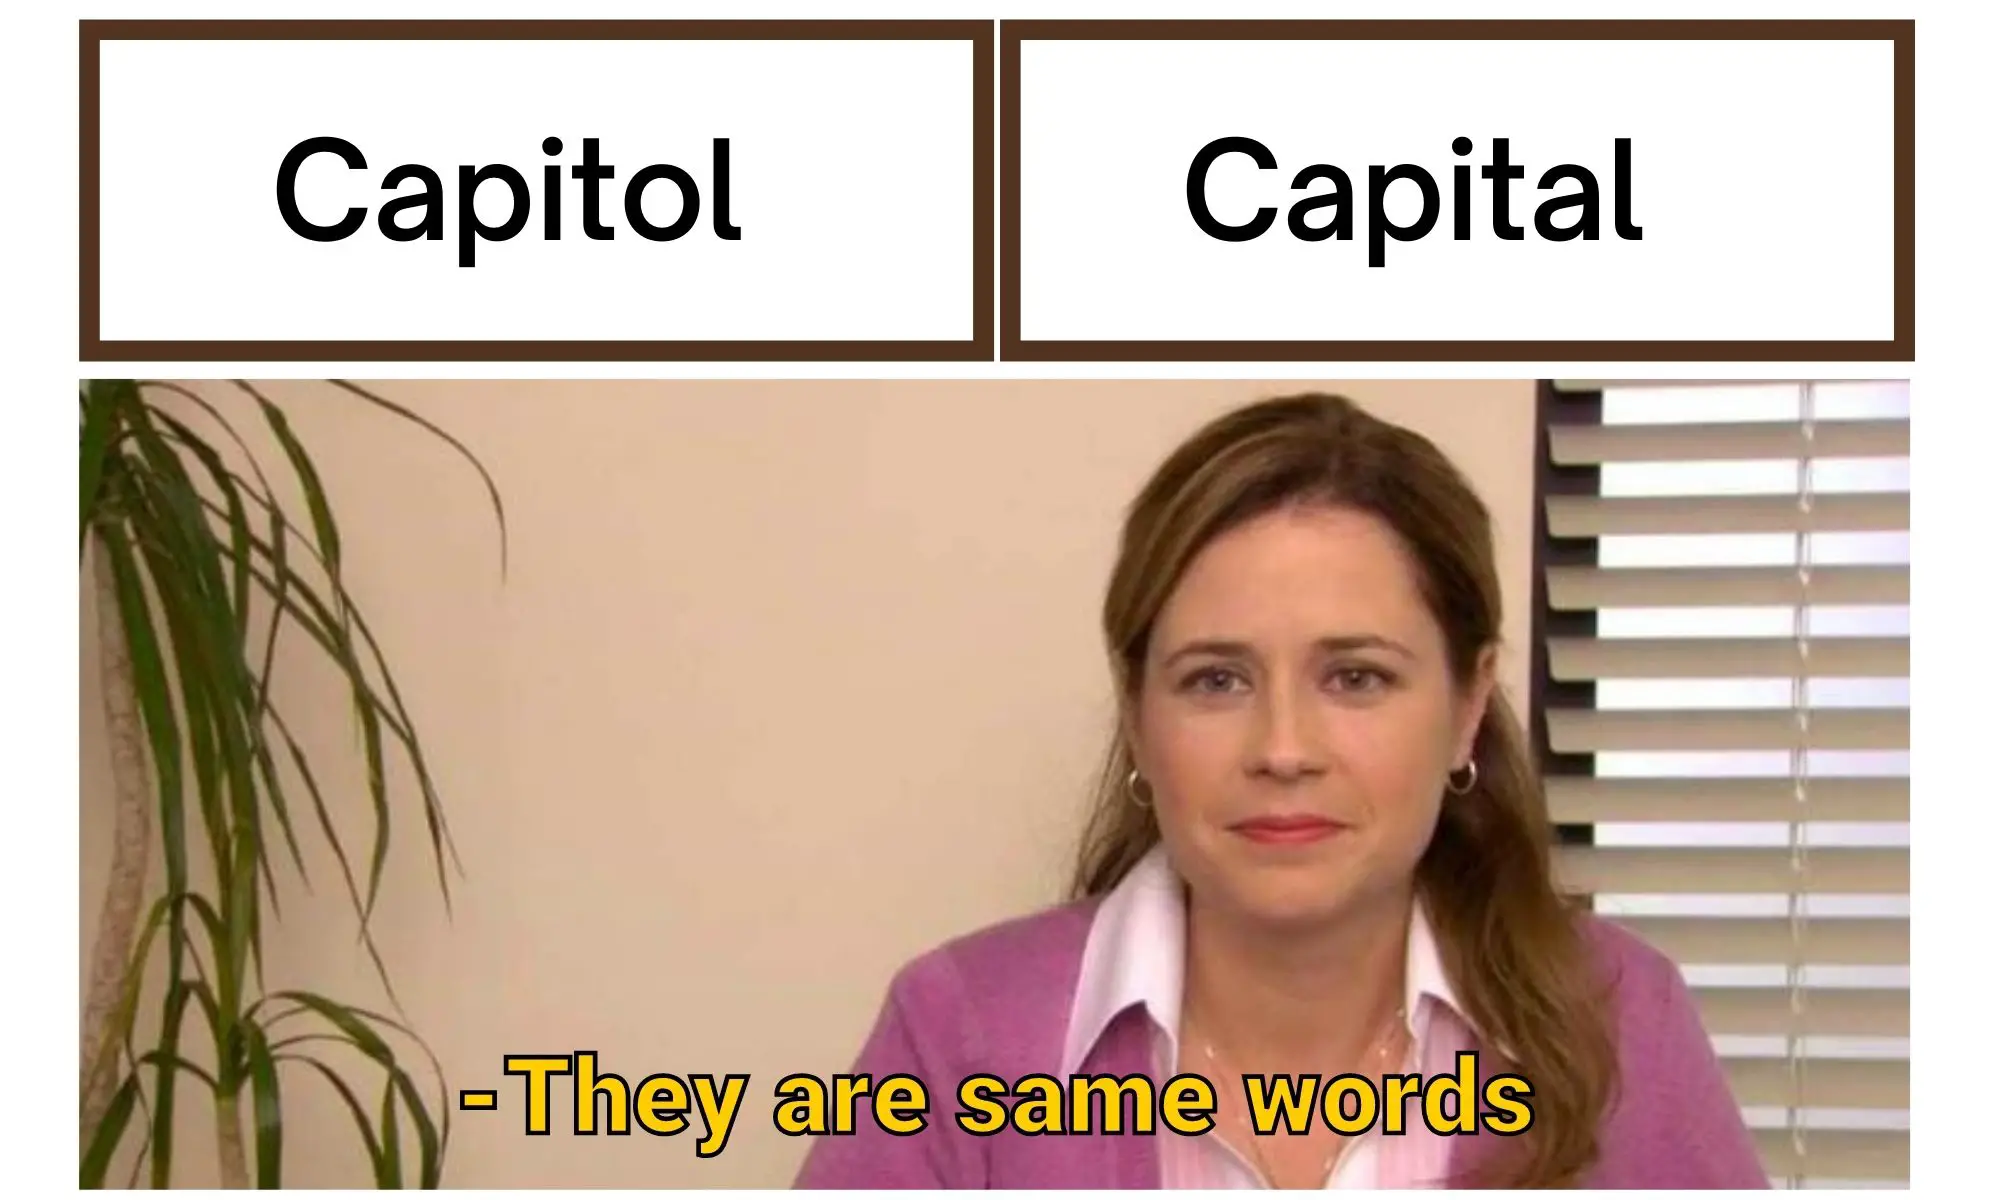 Capital vs Capitol meme on they are the same picture